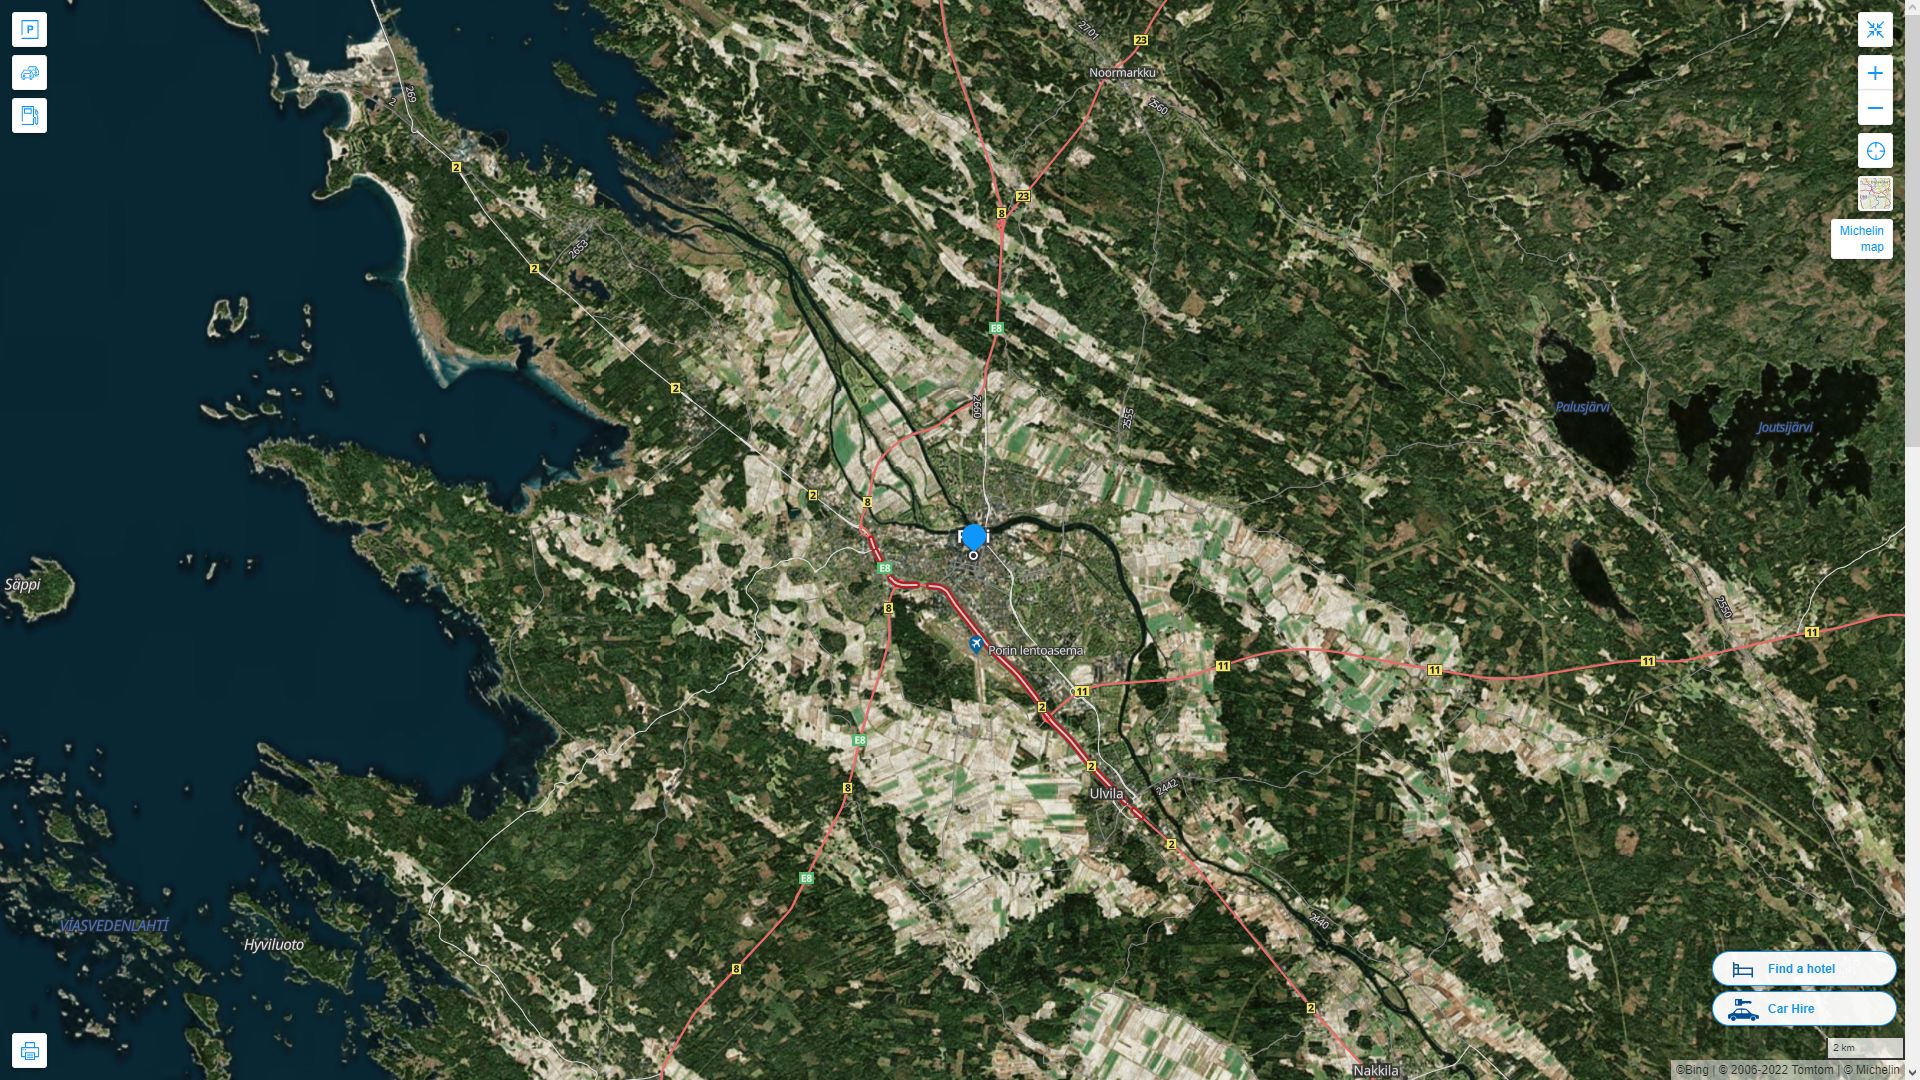 Pori Highway and Road Map with Satellite View